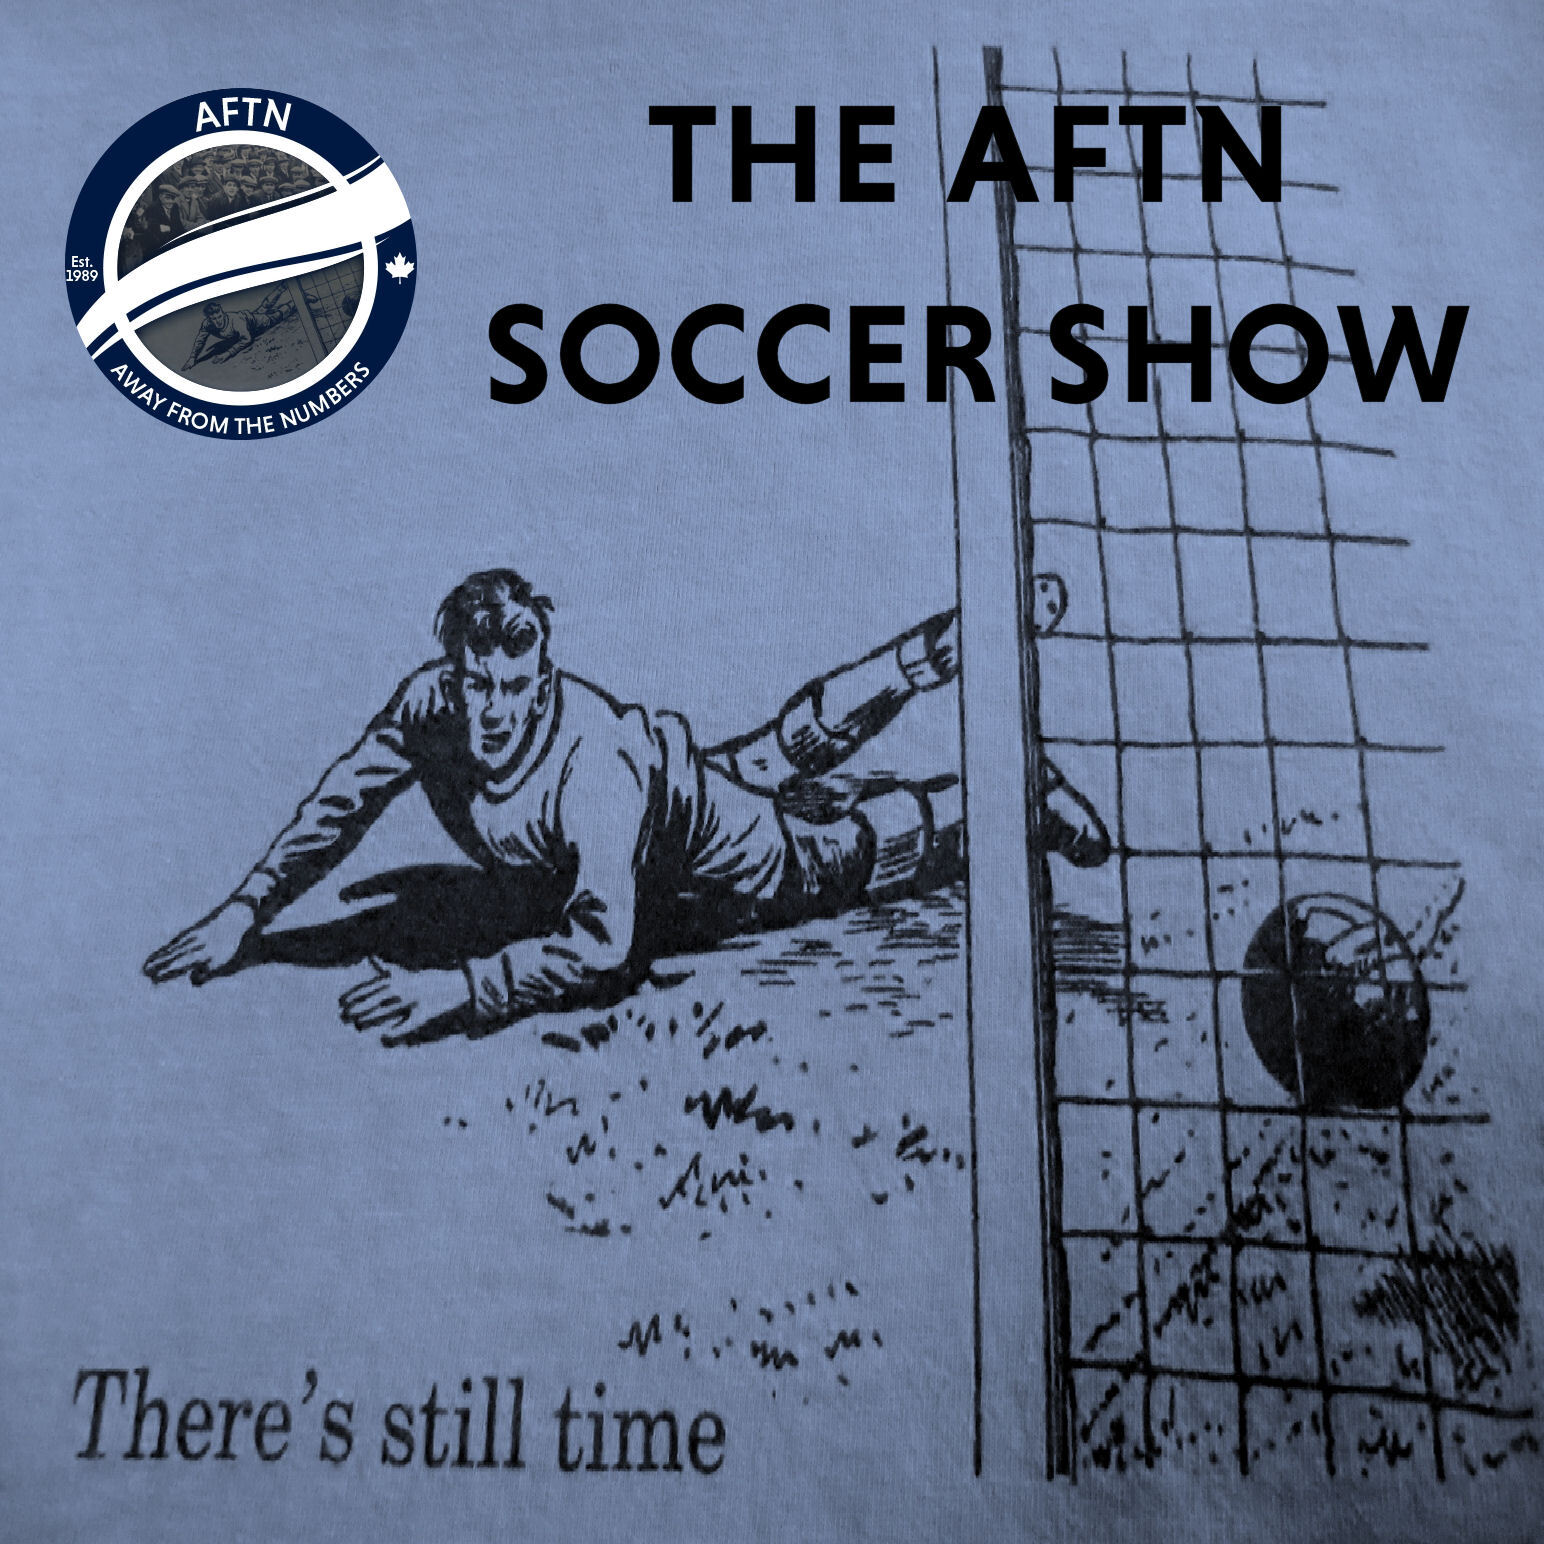 Episode 295 - The AFTN Soccer Show (Keeping It Tight with guests Chris Wondolowski, Felipe, Marcel de Jong, and Caleb Clarke)